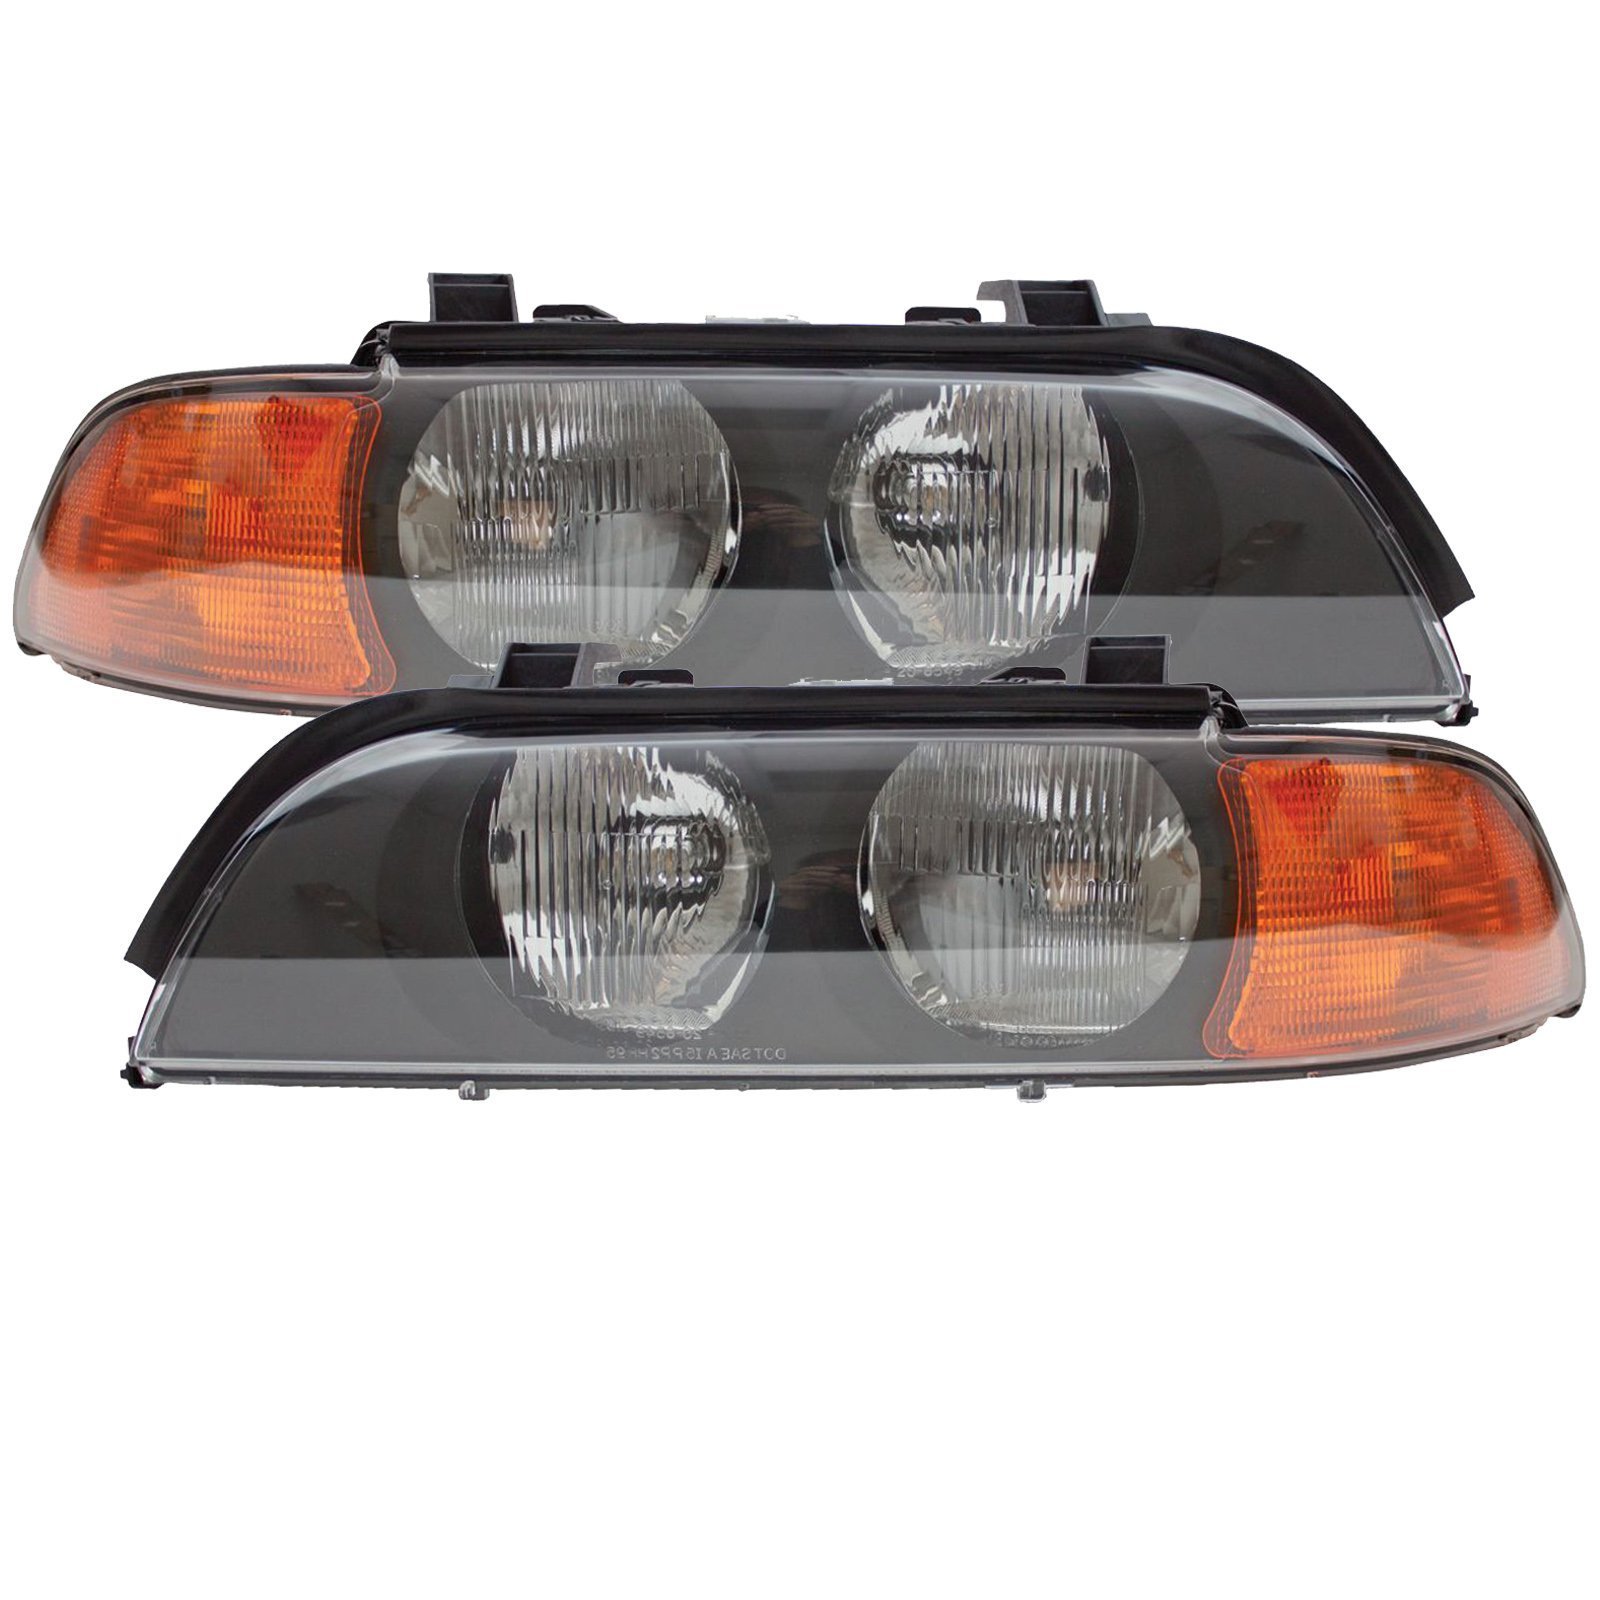 HEADLIGHTSDEPOT Left and Right Black Housing Headlight Compatible with 2004-2007 Fleetwood Providence Motorhome RV 